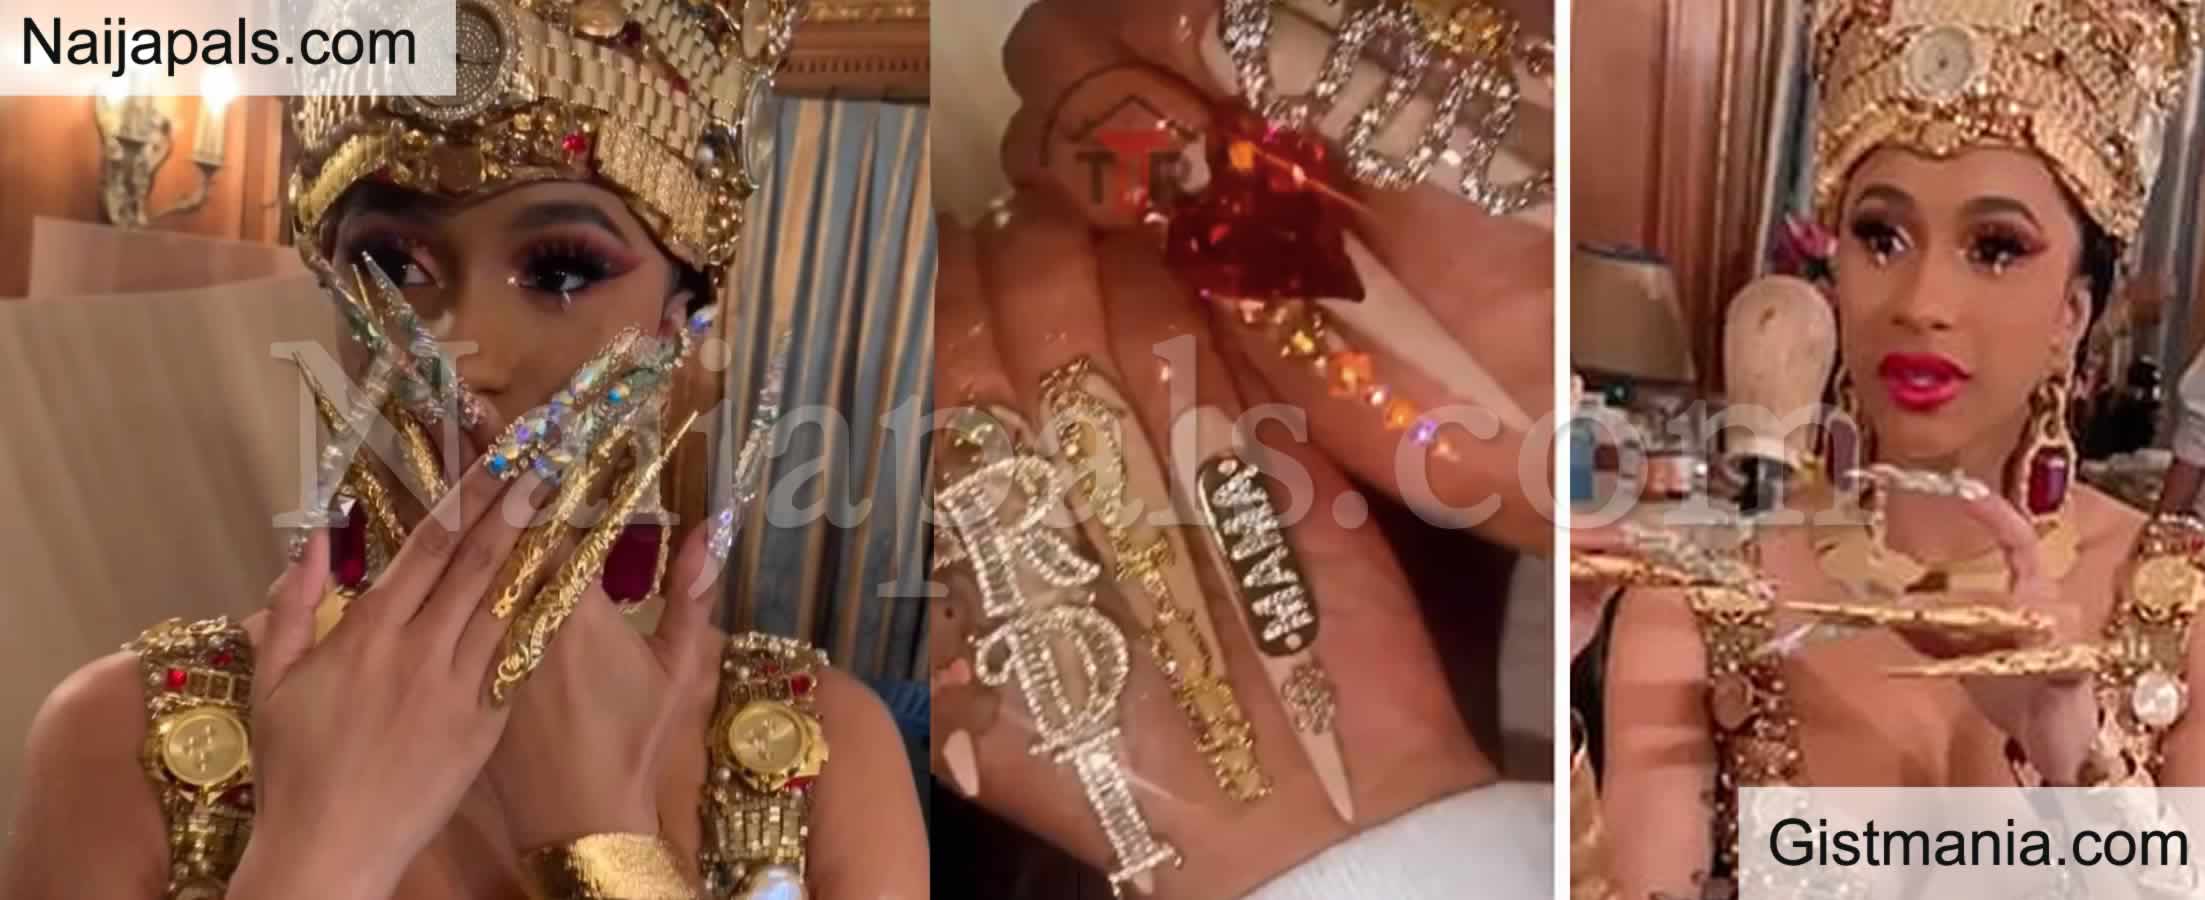 Nail Art Water Decals Cardi B Inspired Water Decals - Etsy